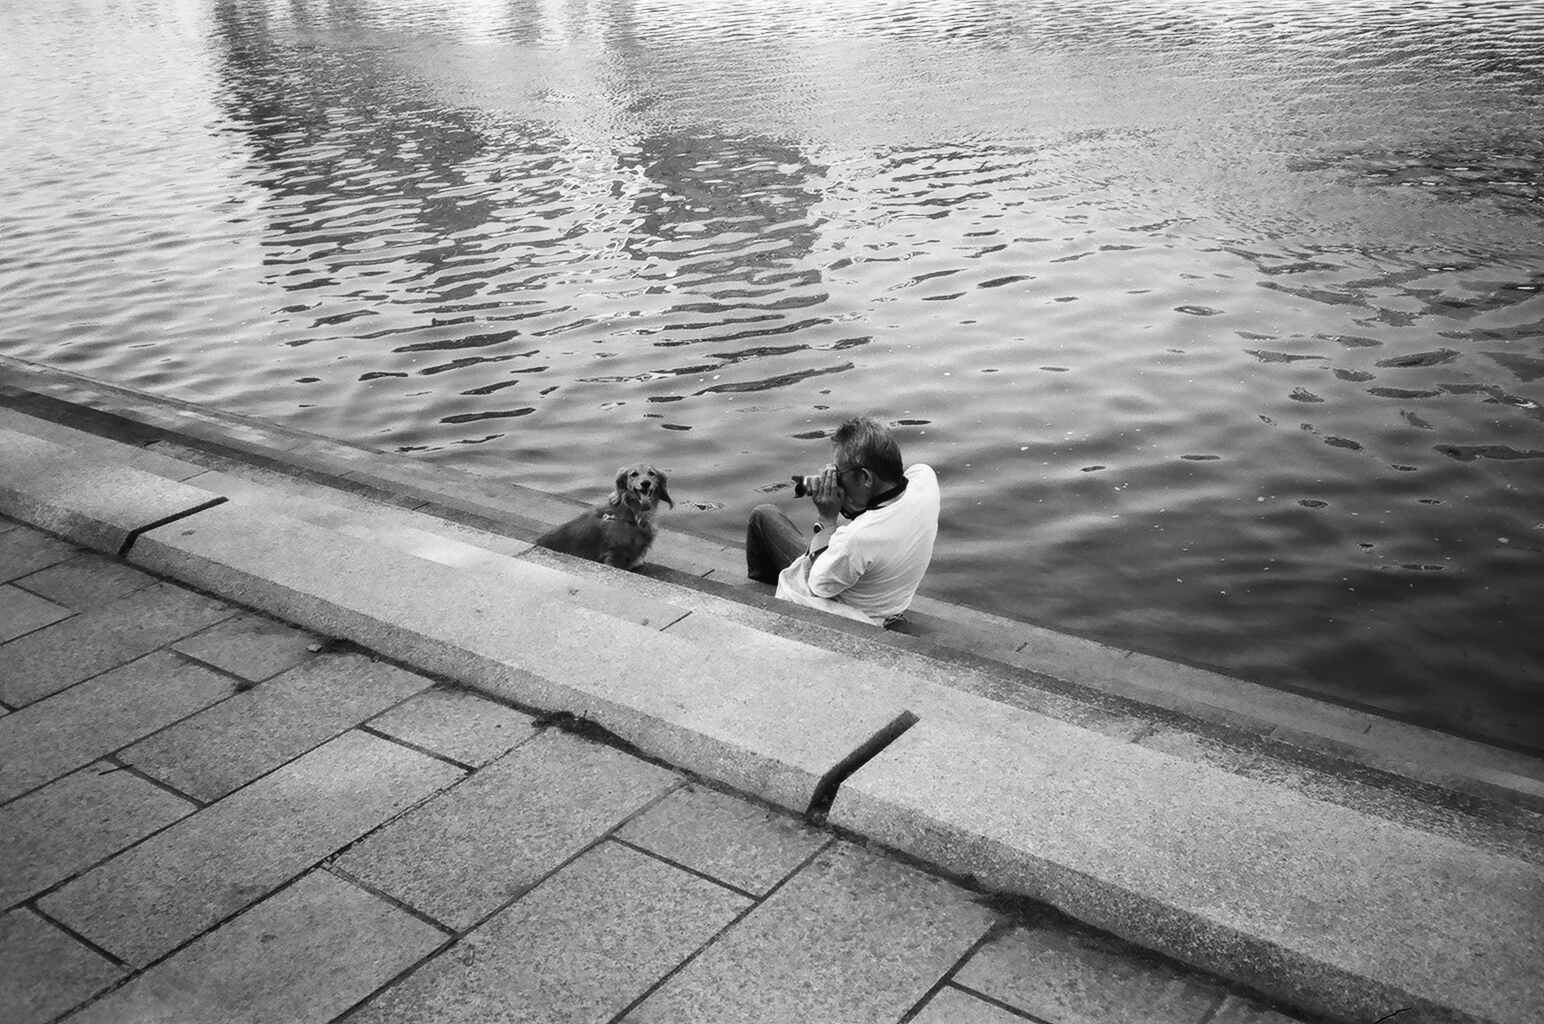  A man photographs his dog by the banks of the Ōta River. The steps wade into the cool water making it a popular place to sit and admire the city during the summer. 